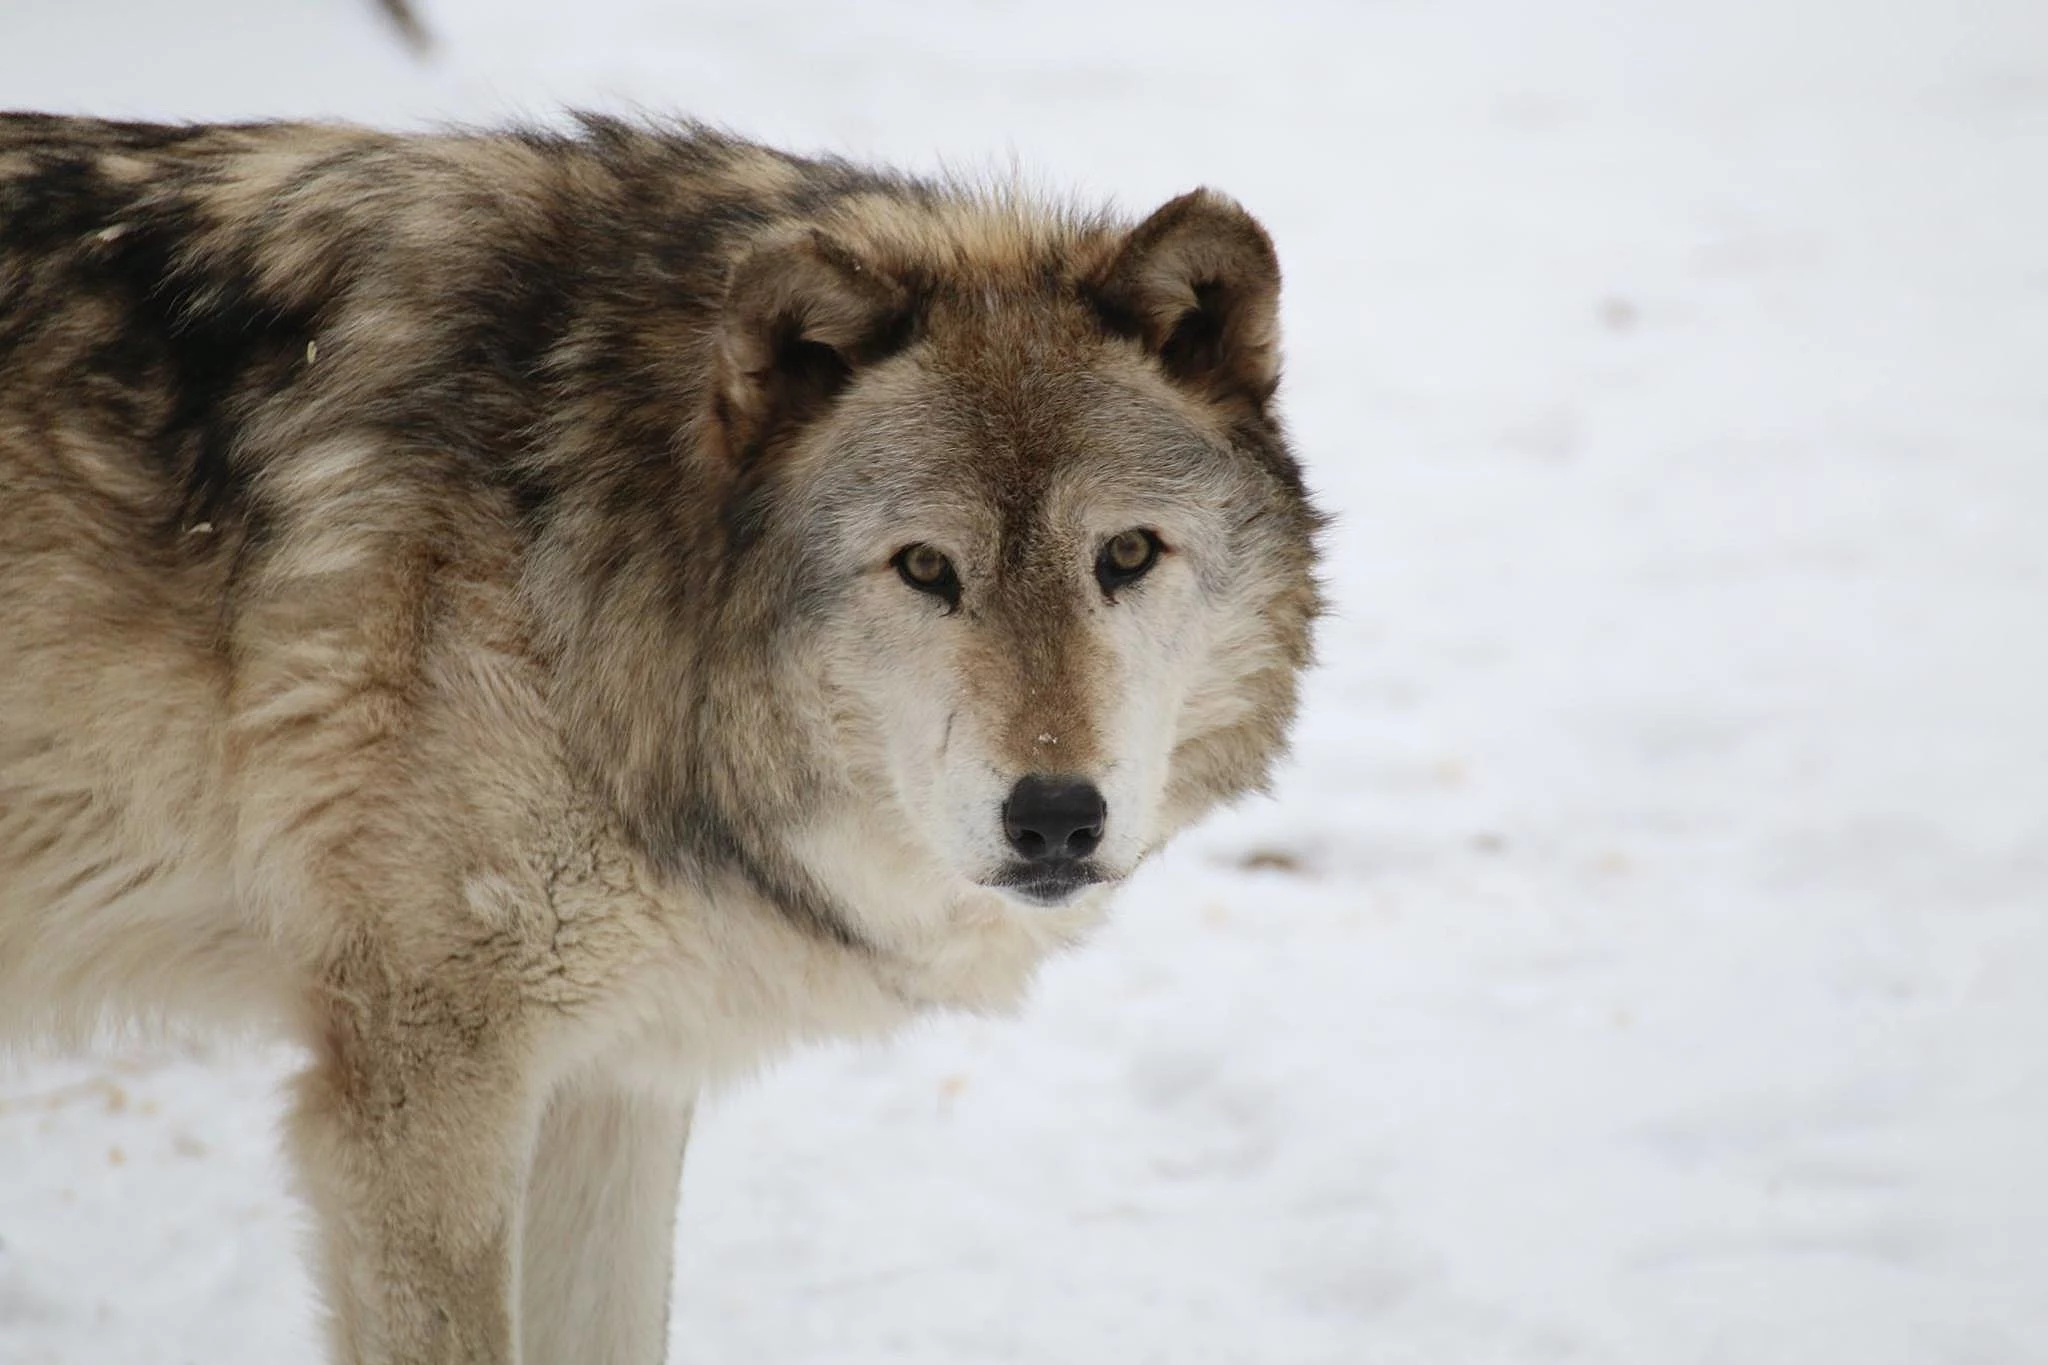 Come watch the wolves, and more, at this NJ nature preserve